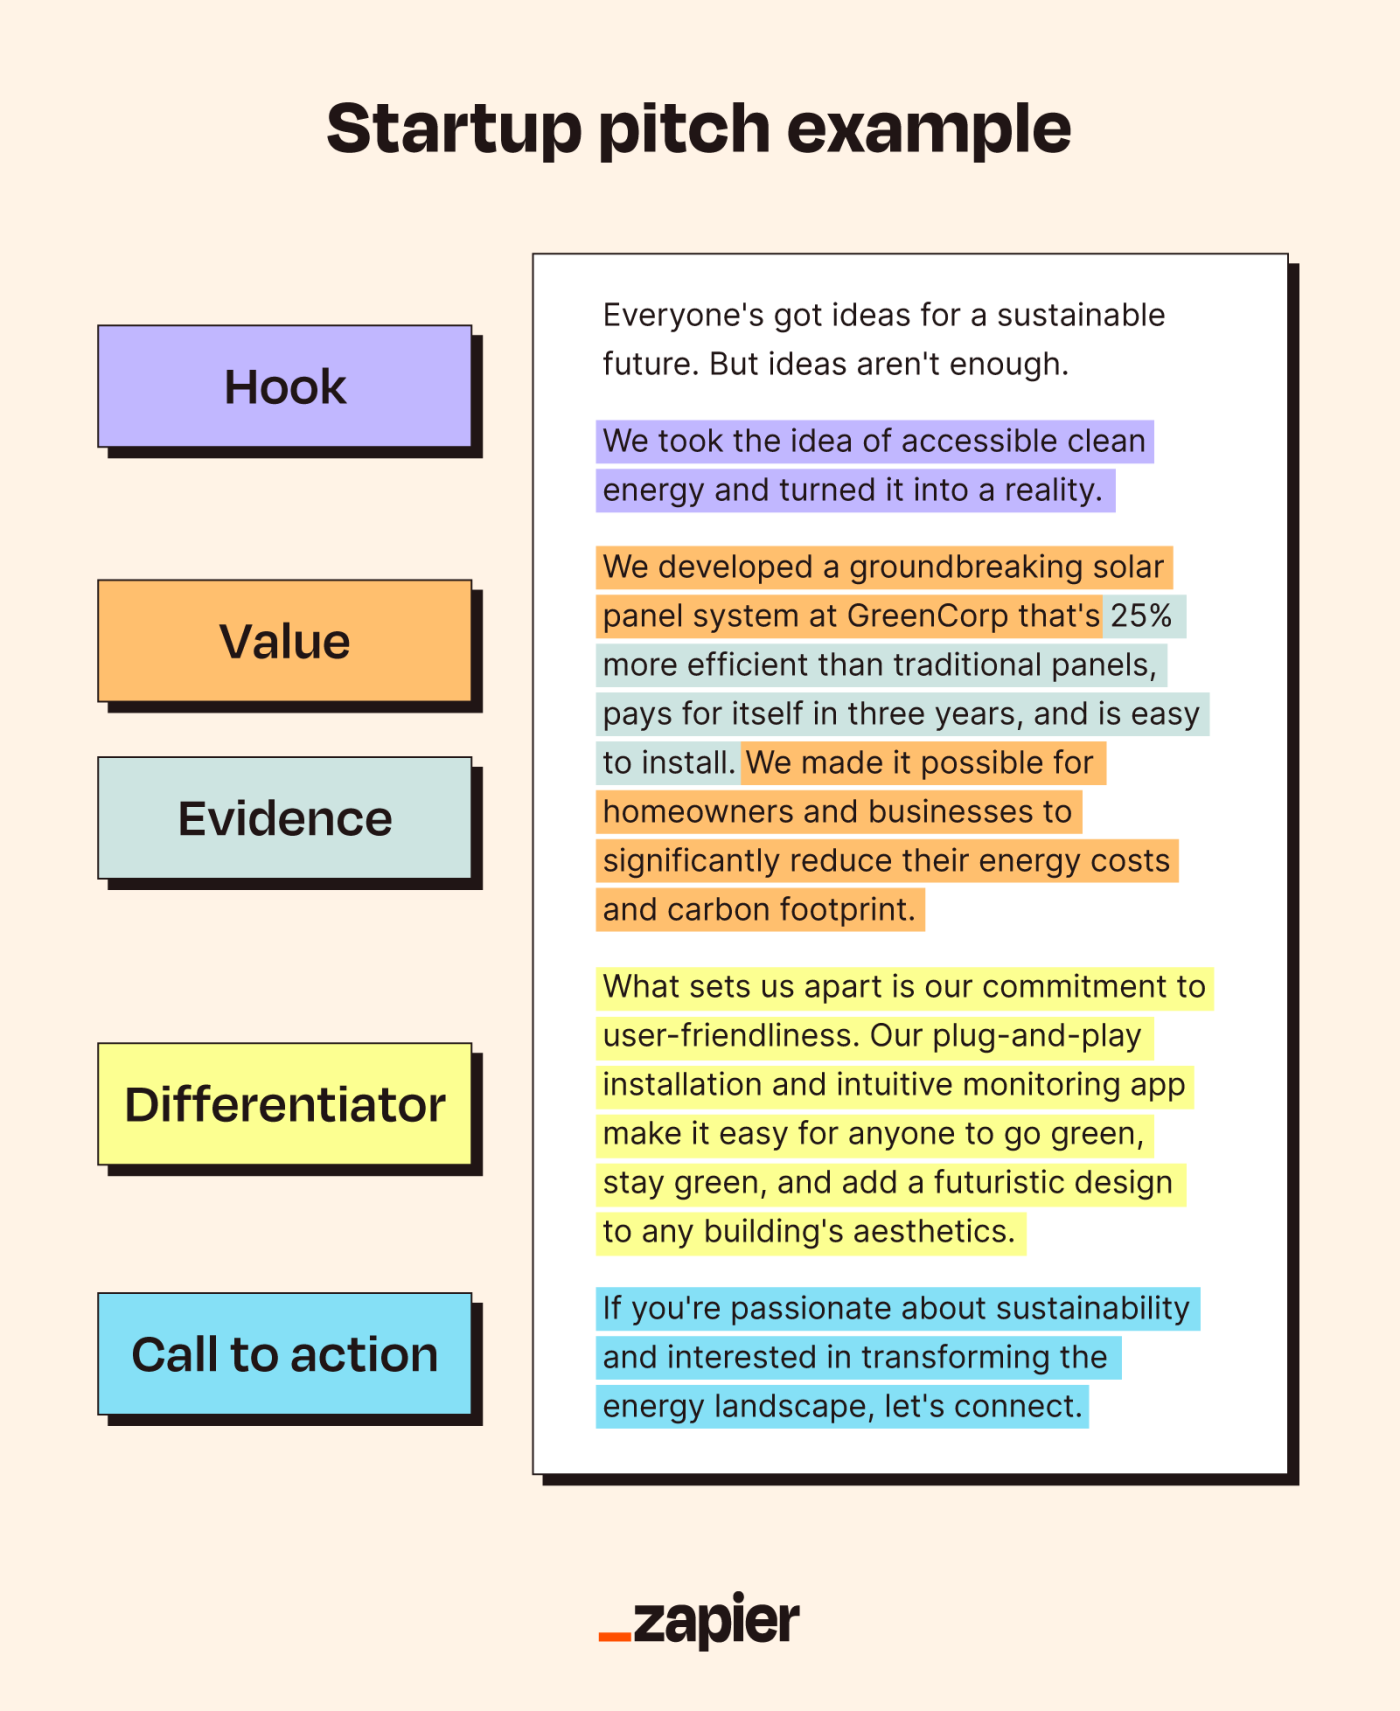 An example elevator pitch for startup companies, with the hook, value, evidence, differentiator, and call to action highlighted in different colors